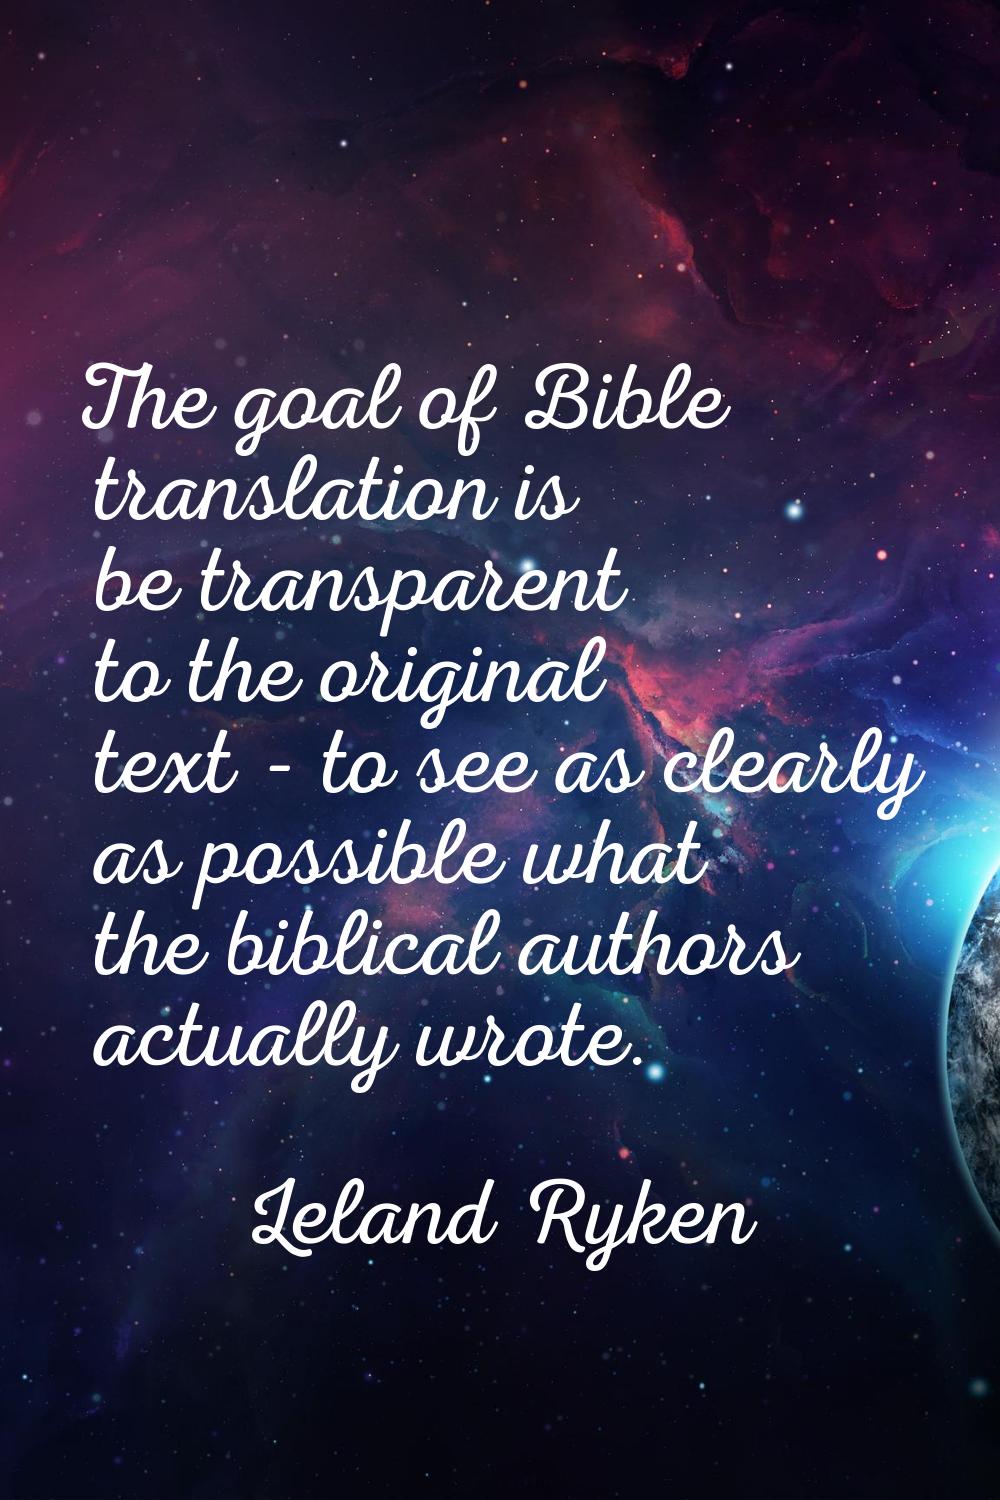 The goal of Bible translation is be transparent to the original text - to see as clearly as possibl